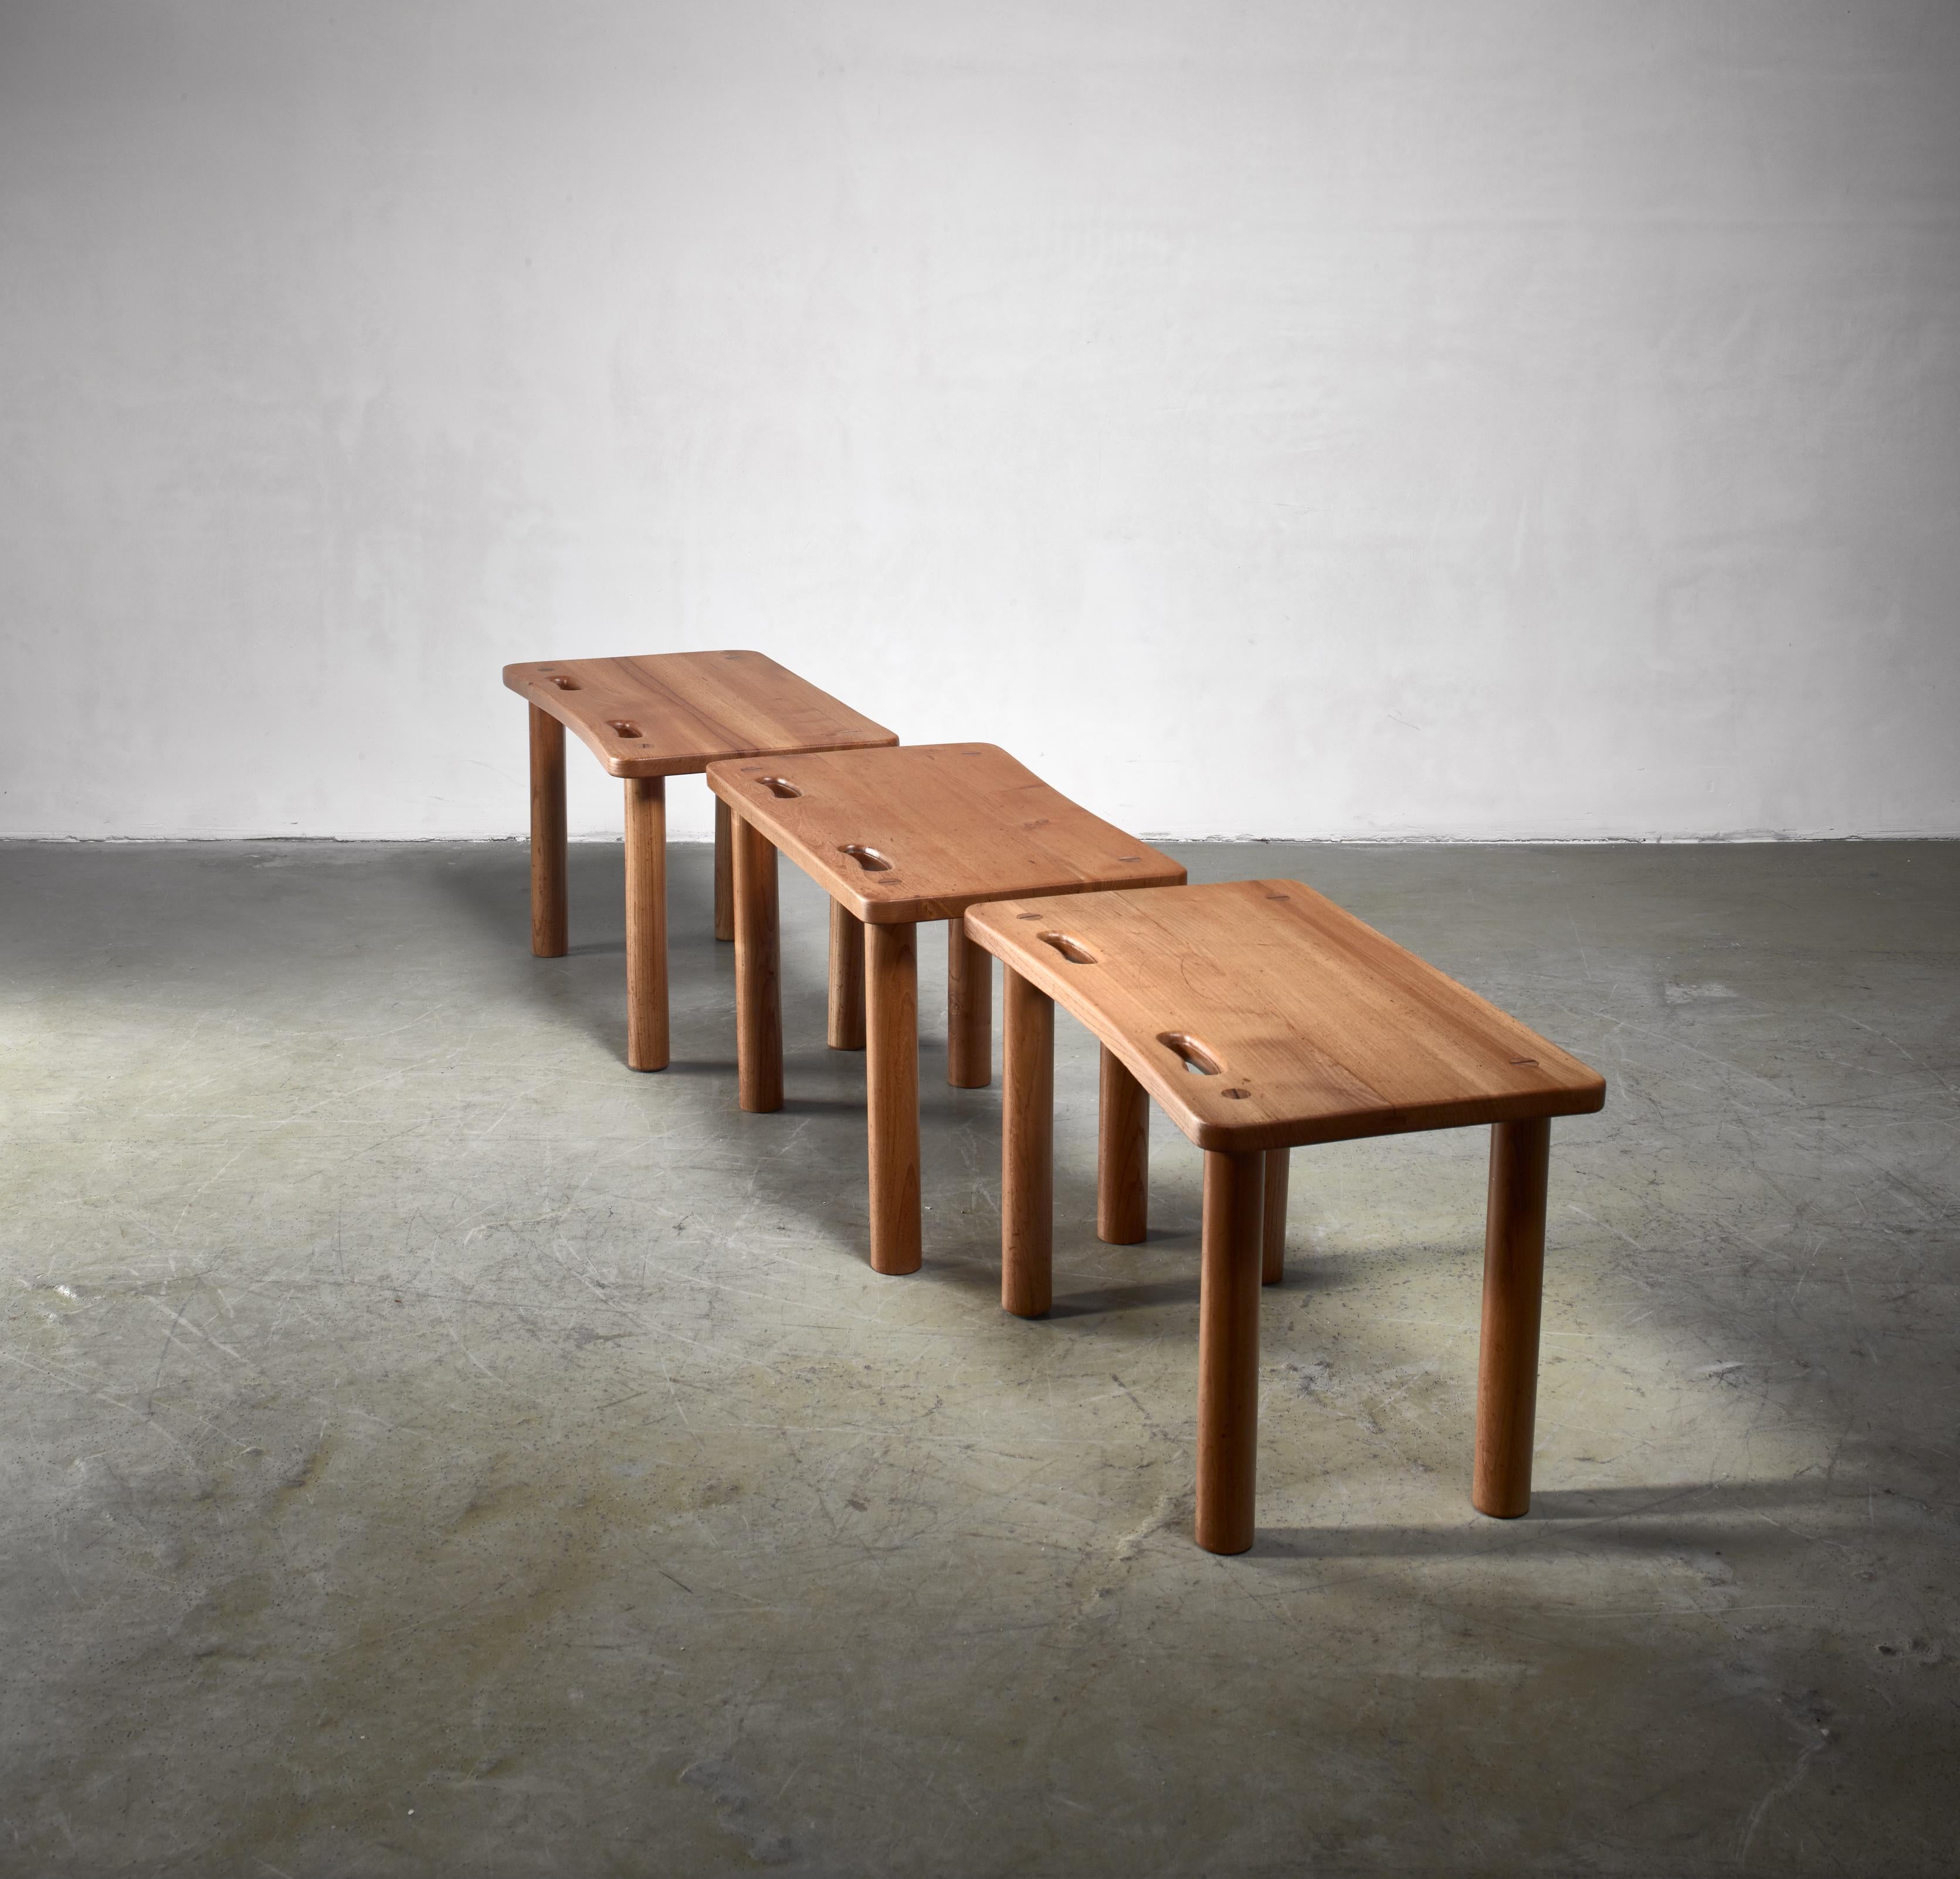 A set of three pine benches or side tables in the Campaign style known from works my Charlotte Perriand, Pierre Chapo and Roland Wilhelmsson. 
They stand on thick round legs and have two grips in the seat.